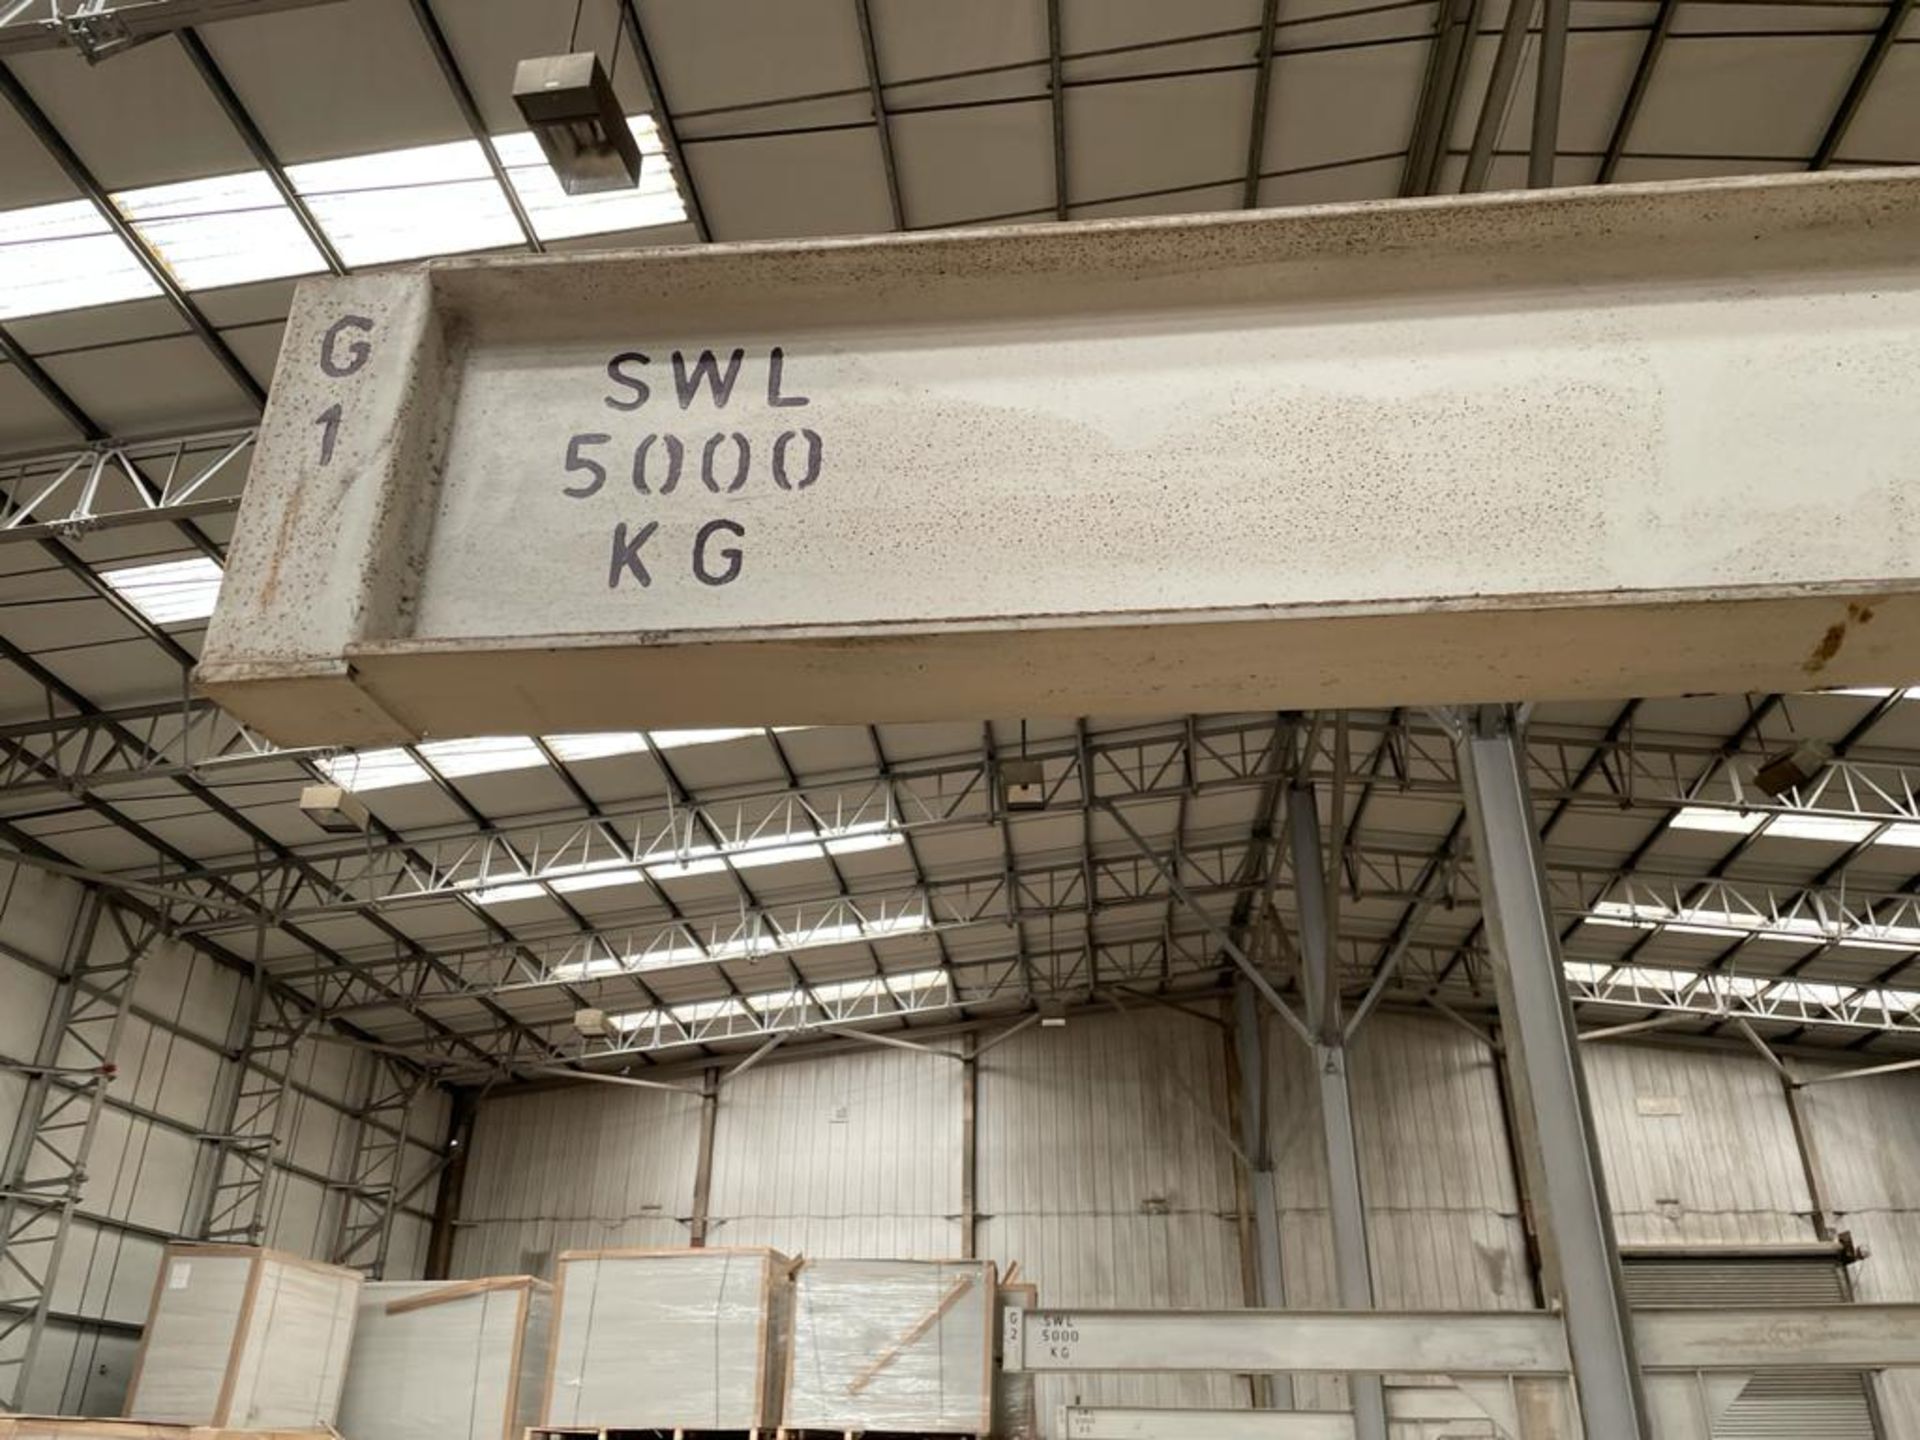 2 x Heavy Duty Cantilever Racking Uprights - SWL 5000kg - Ideal For Builders Merchants or Warehouses - Image 5 of 8